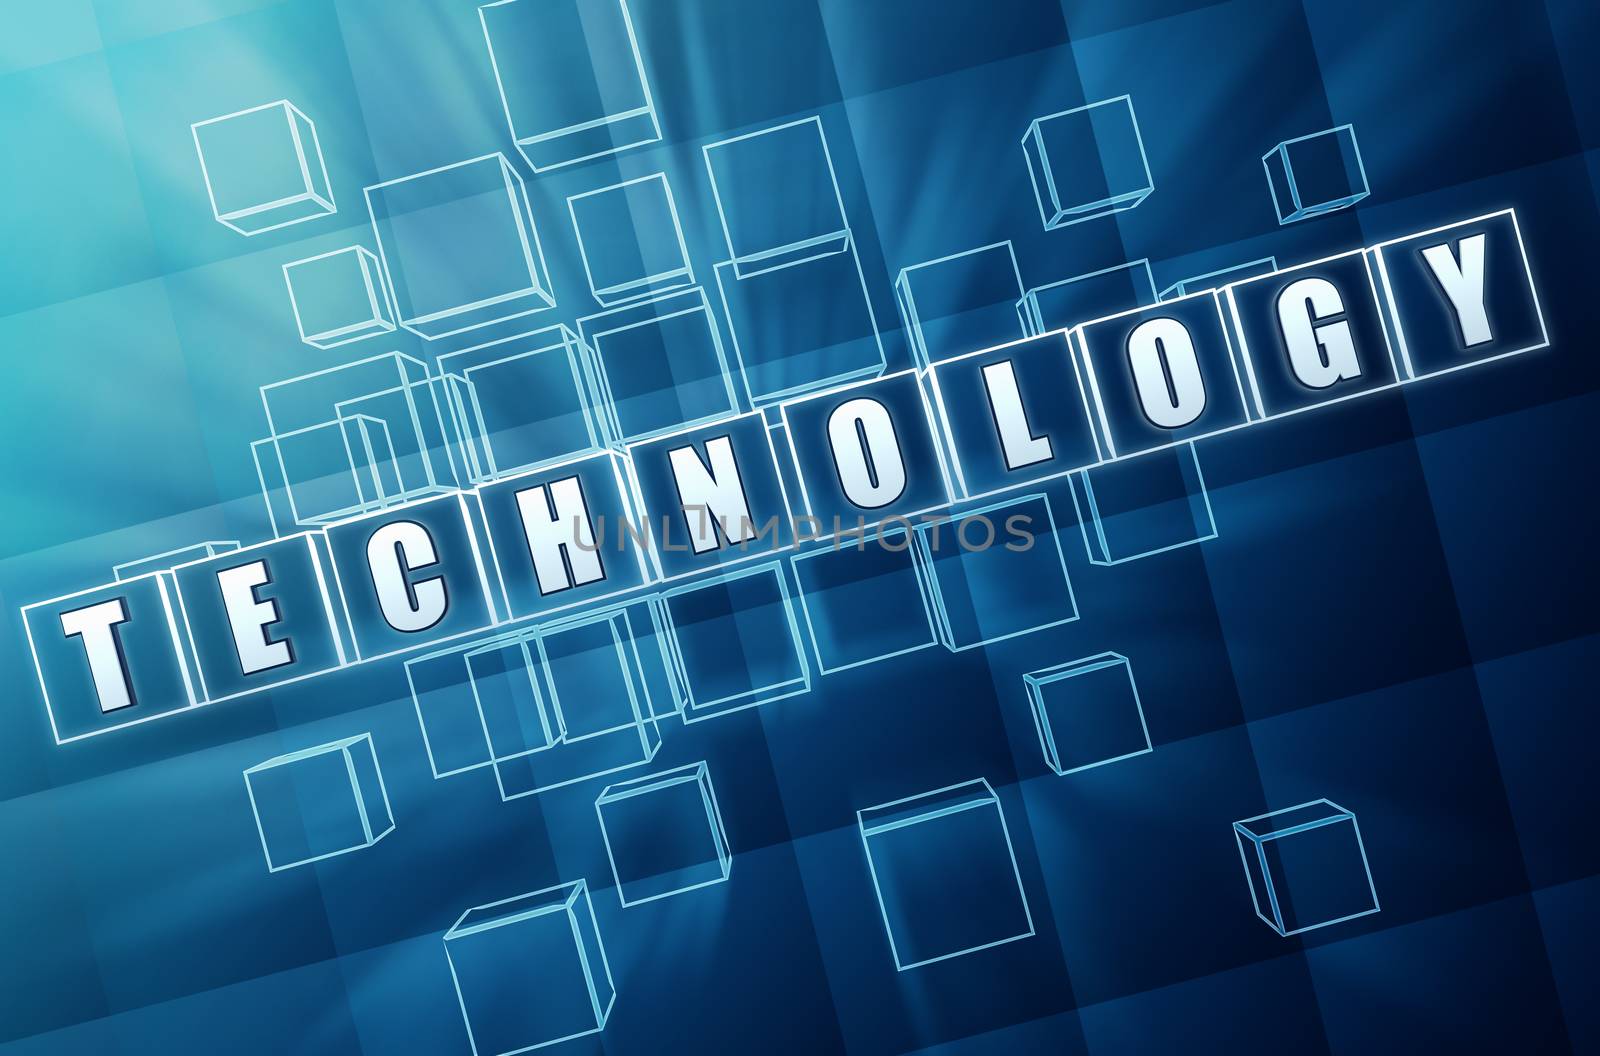 technology - text in 3d blue glass boxes with white letters, technical industry concept